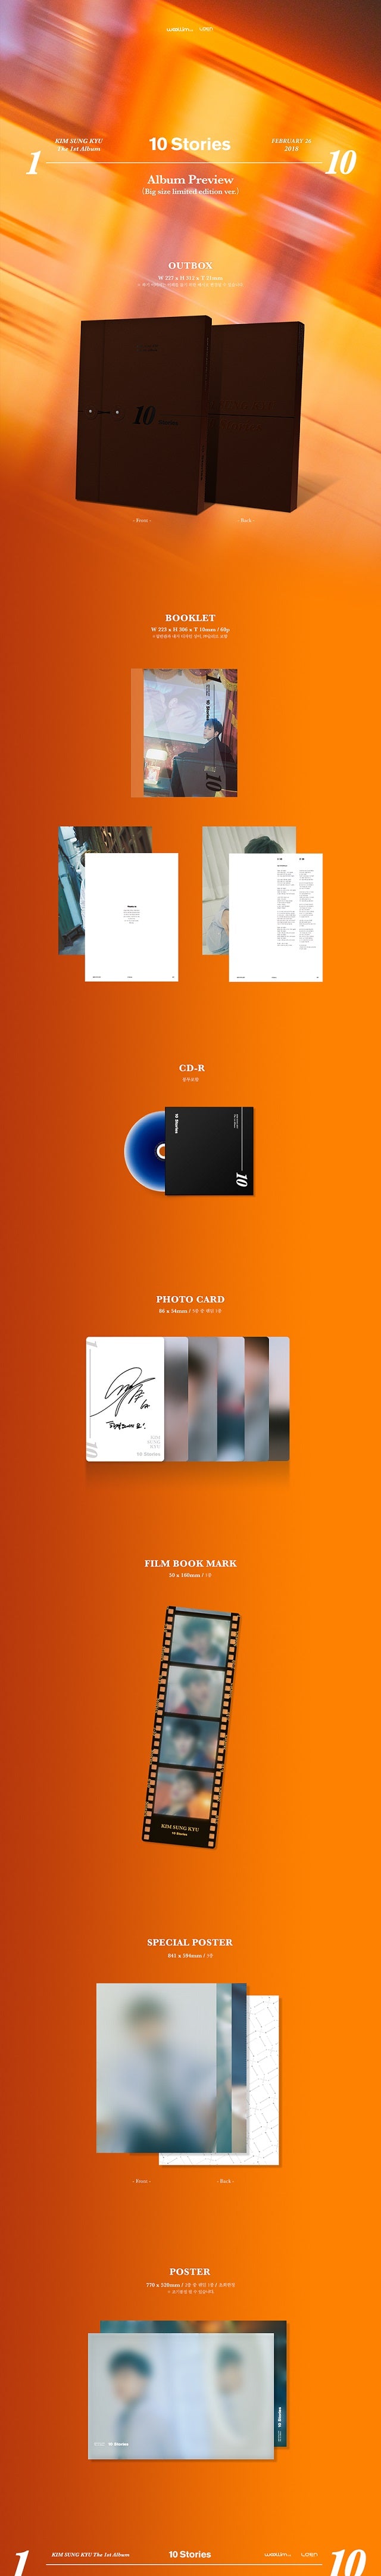 1 CD
1 Booklet (60 pages)
3 Special Posteron-packs
1 Photo Card
1 Film Bookmark